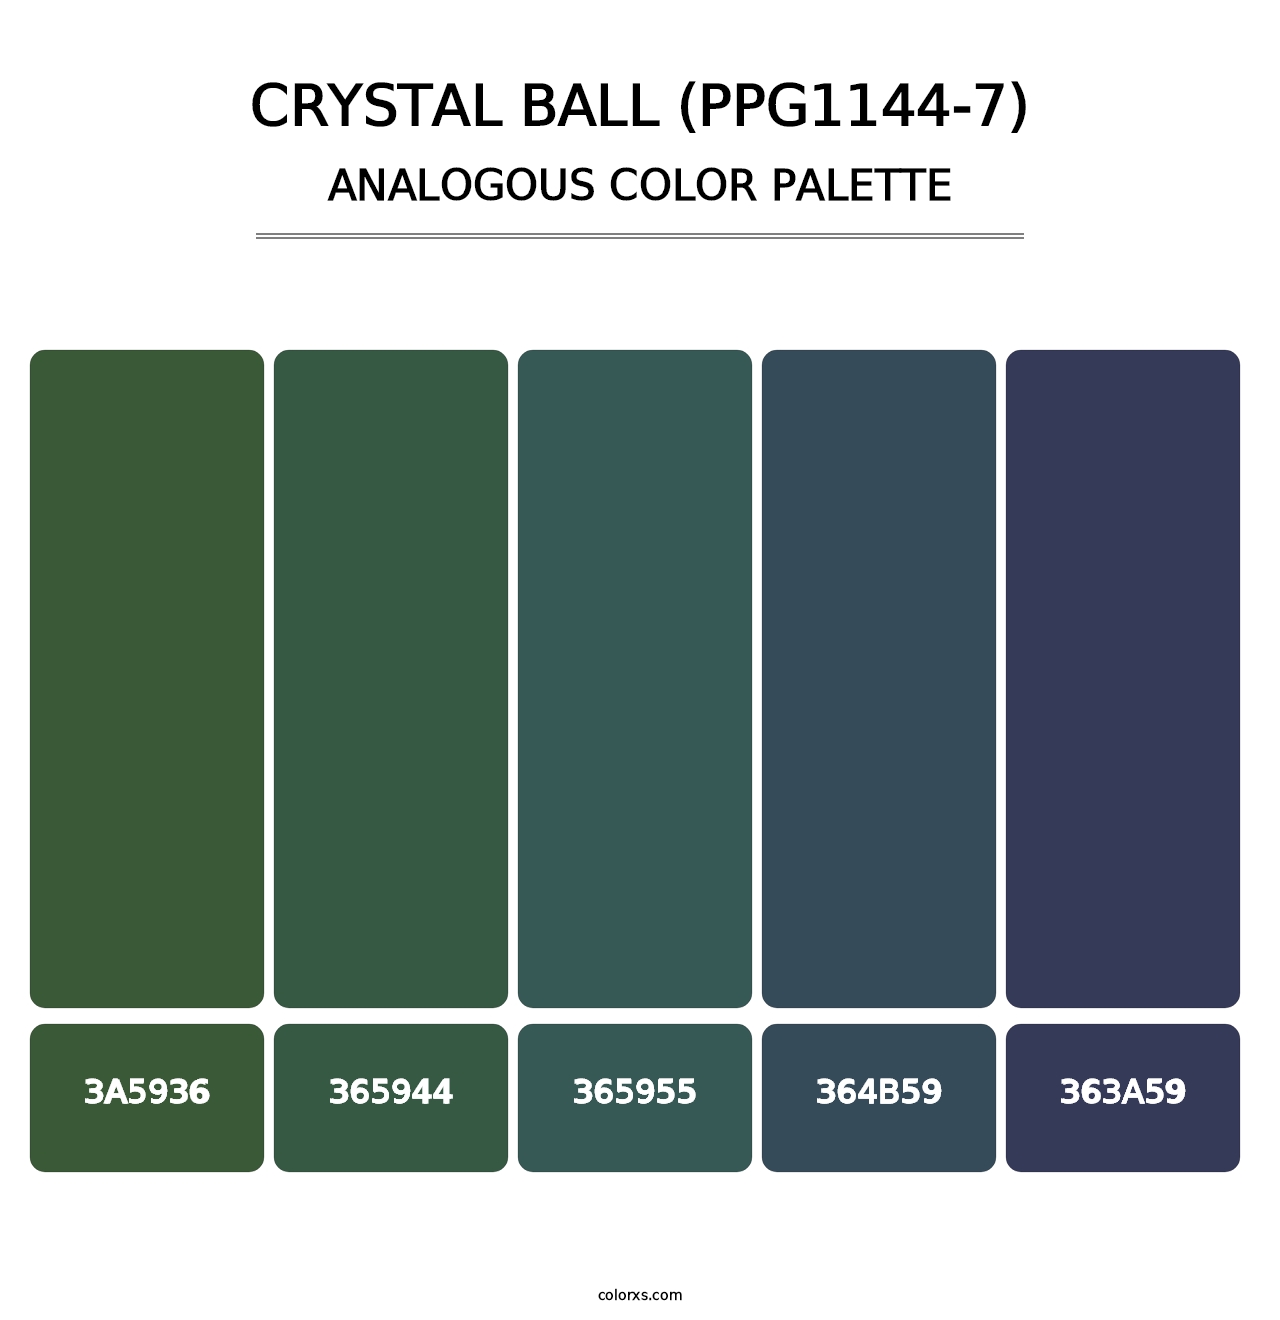 Crystal Ball (PPG1144-7) - Analogous Color Palette